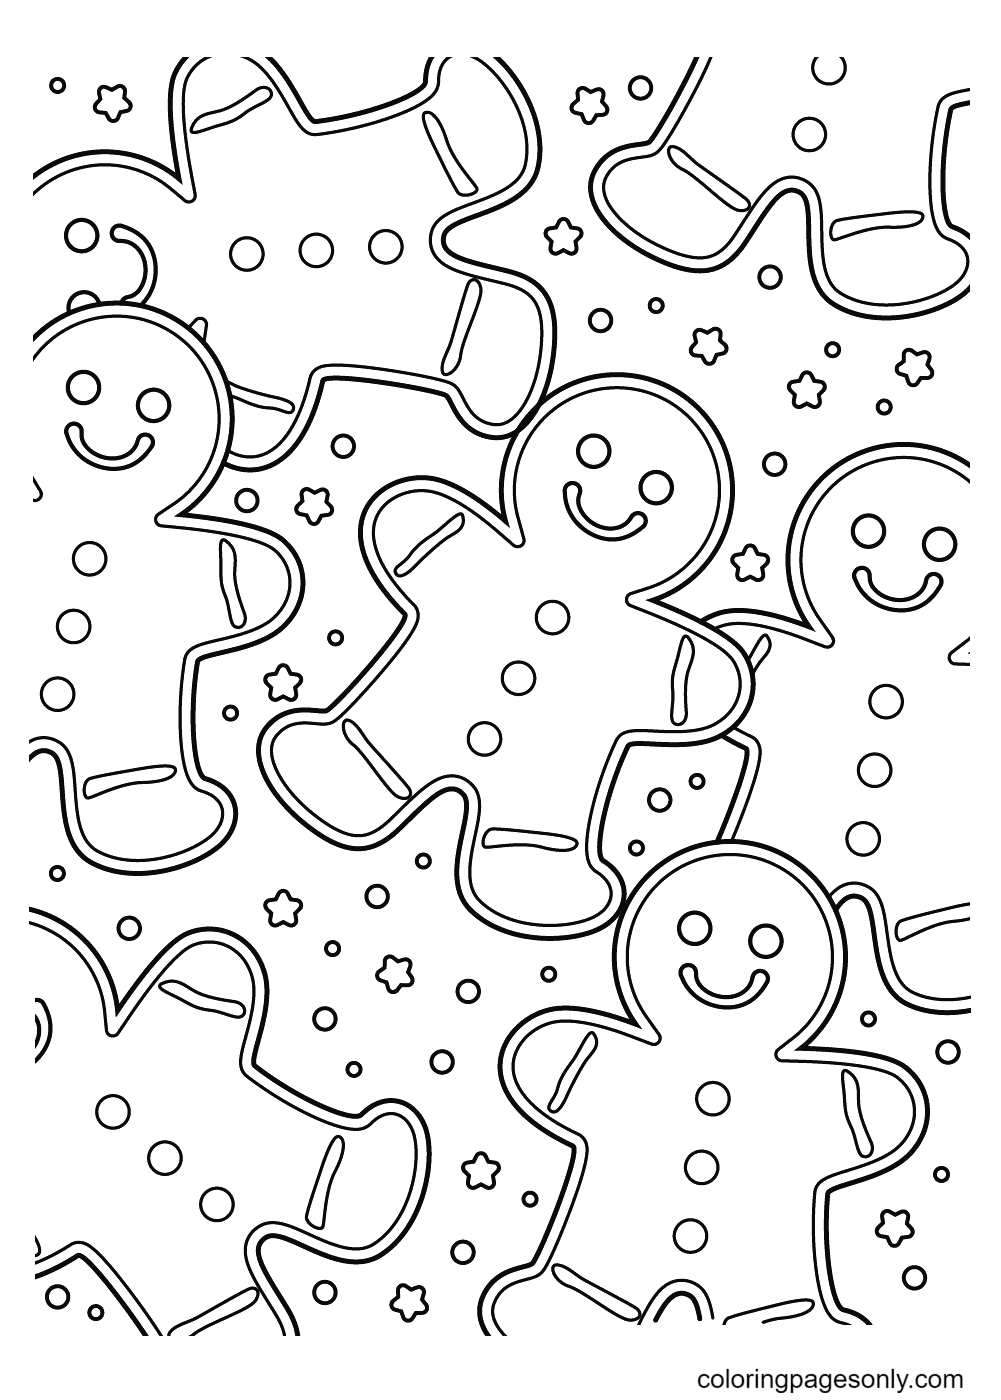 Gingerbread Man out of the Oven Coloring Pages